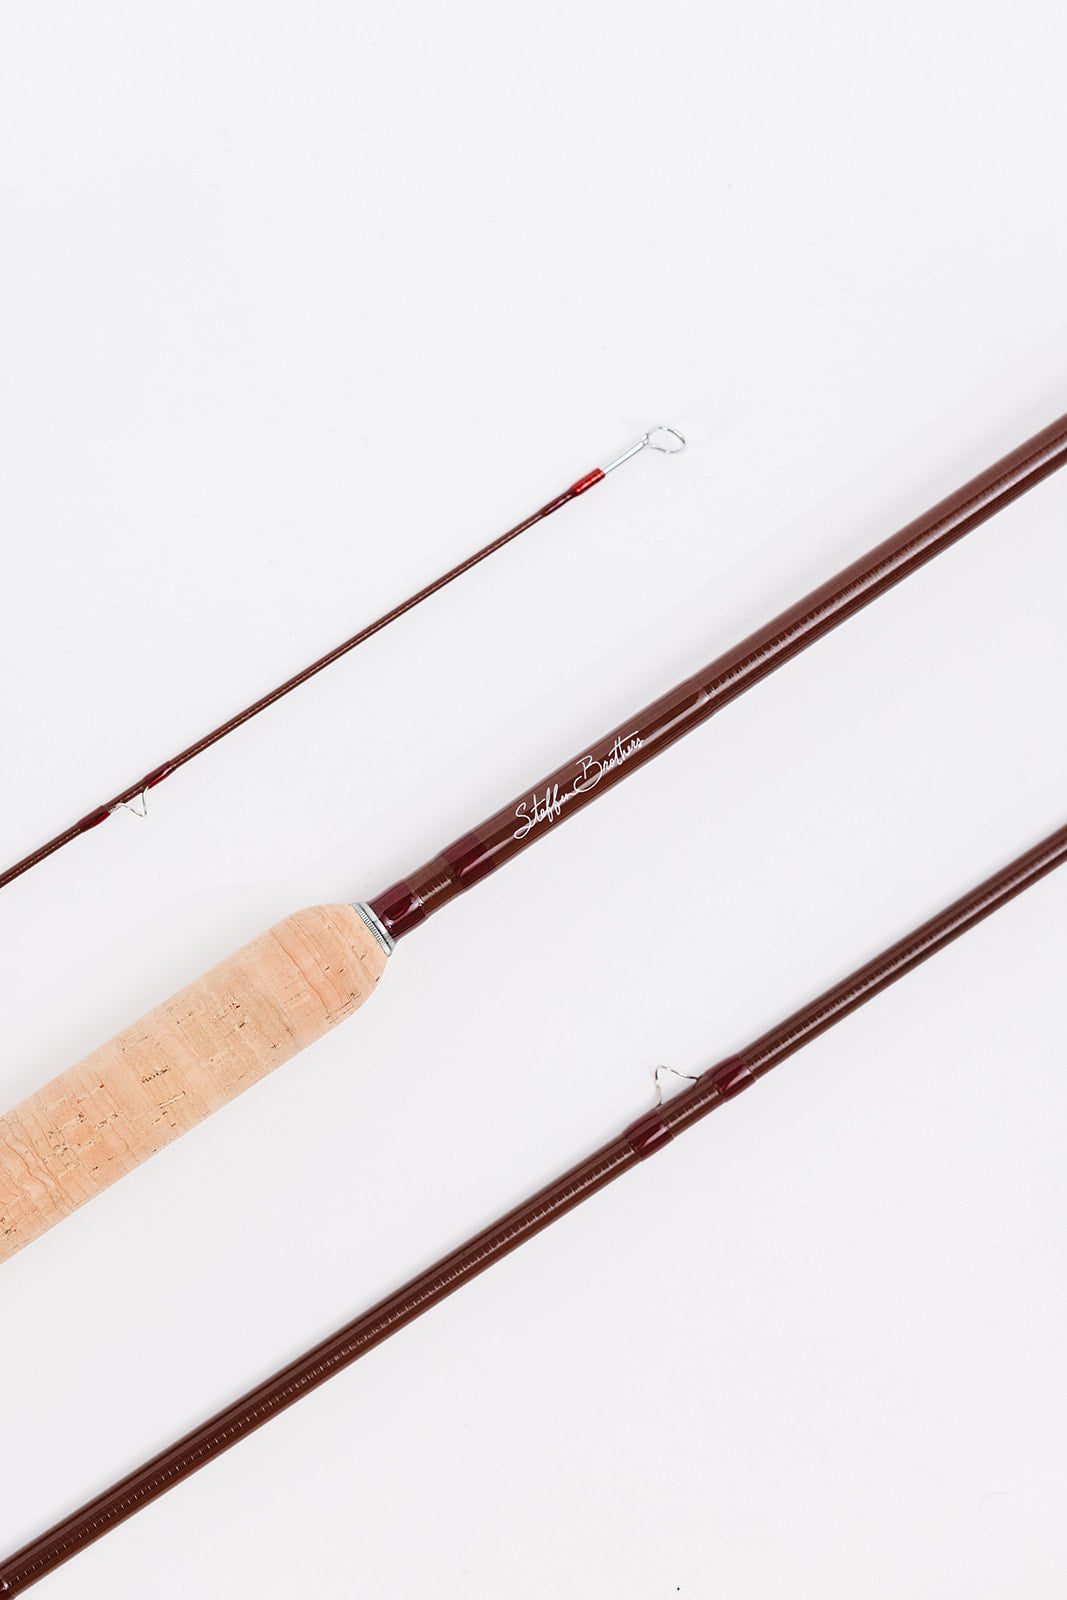 Steffen 864 Fly Rod - Wasatch Fly Fishing